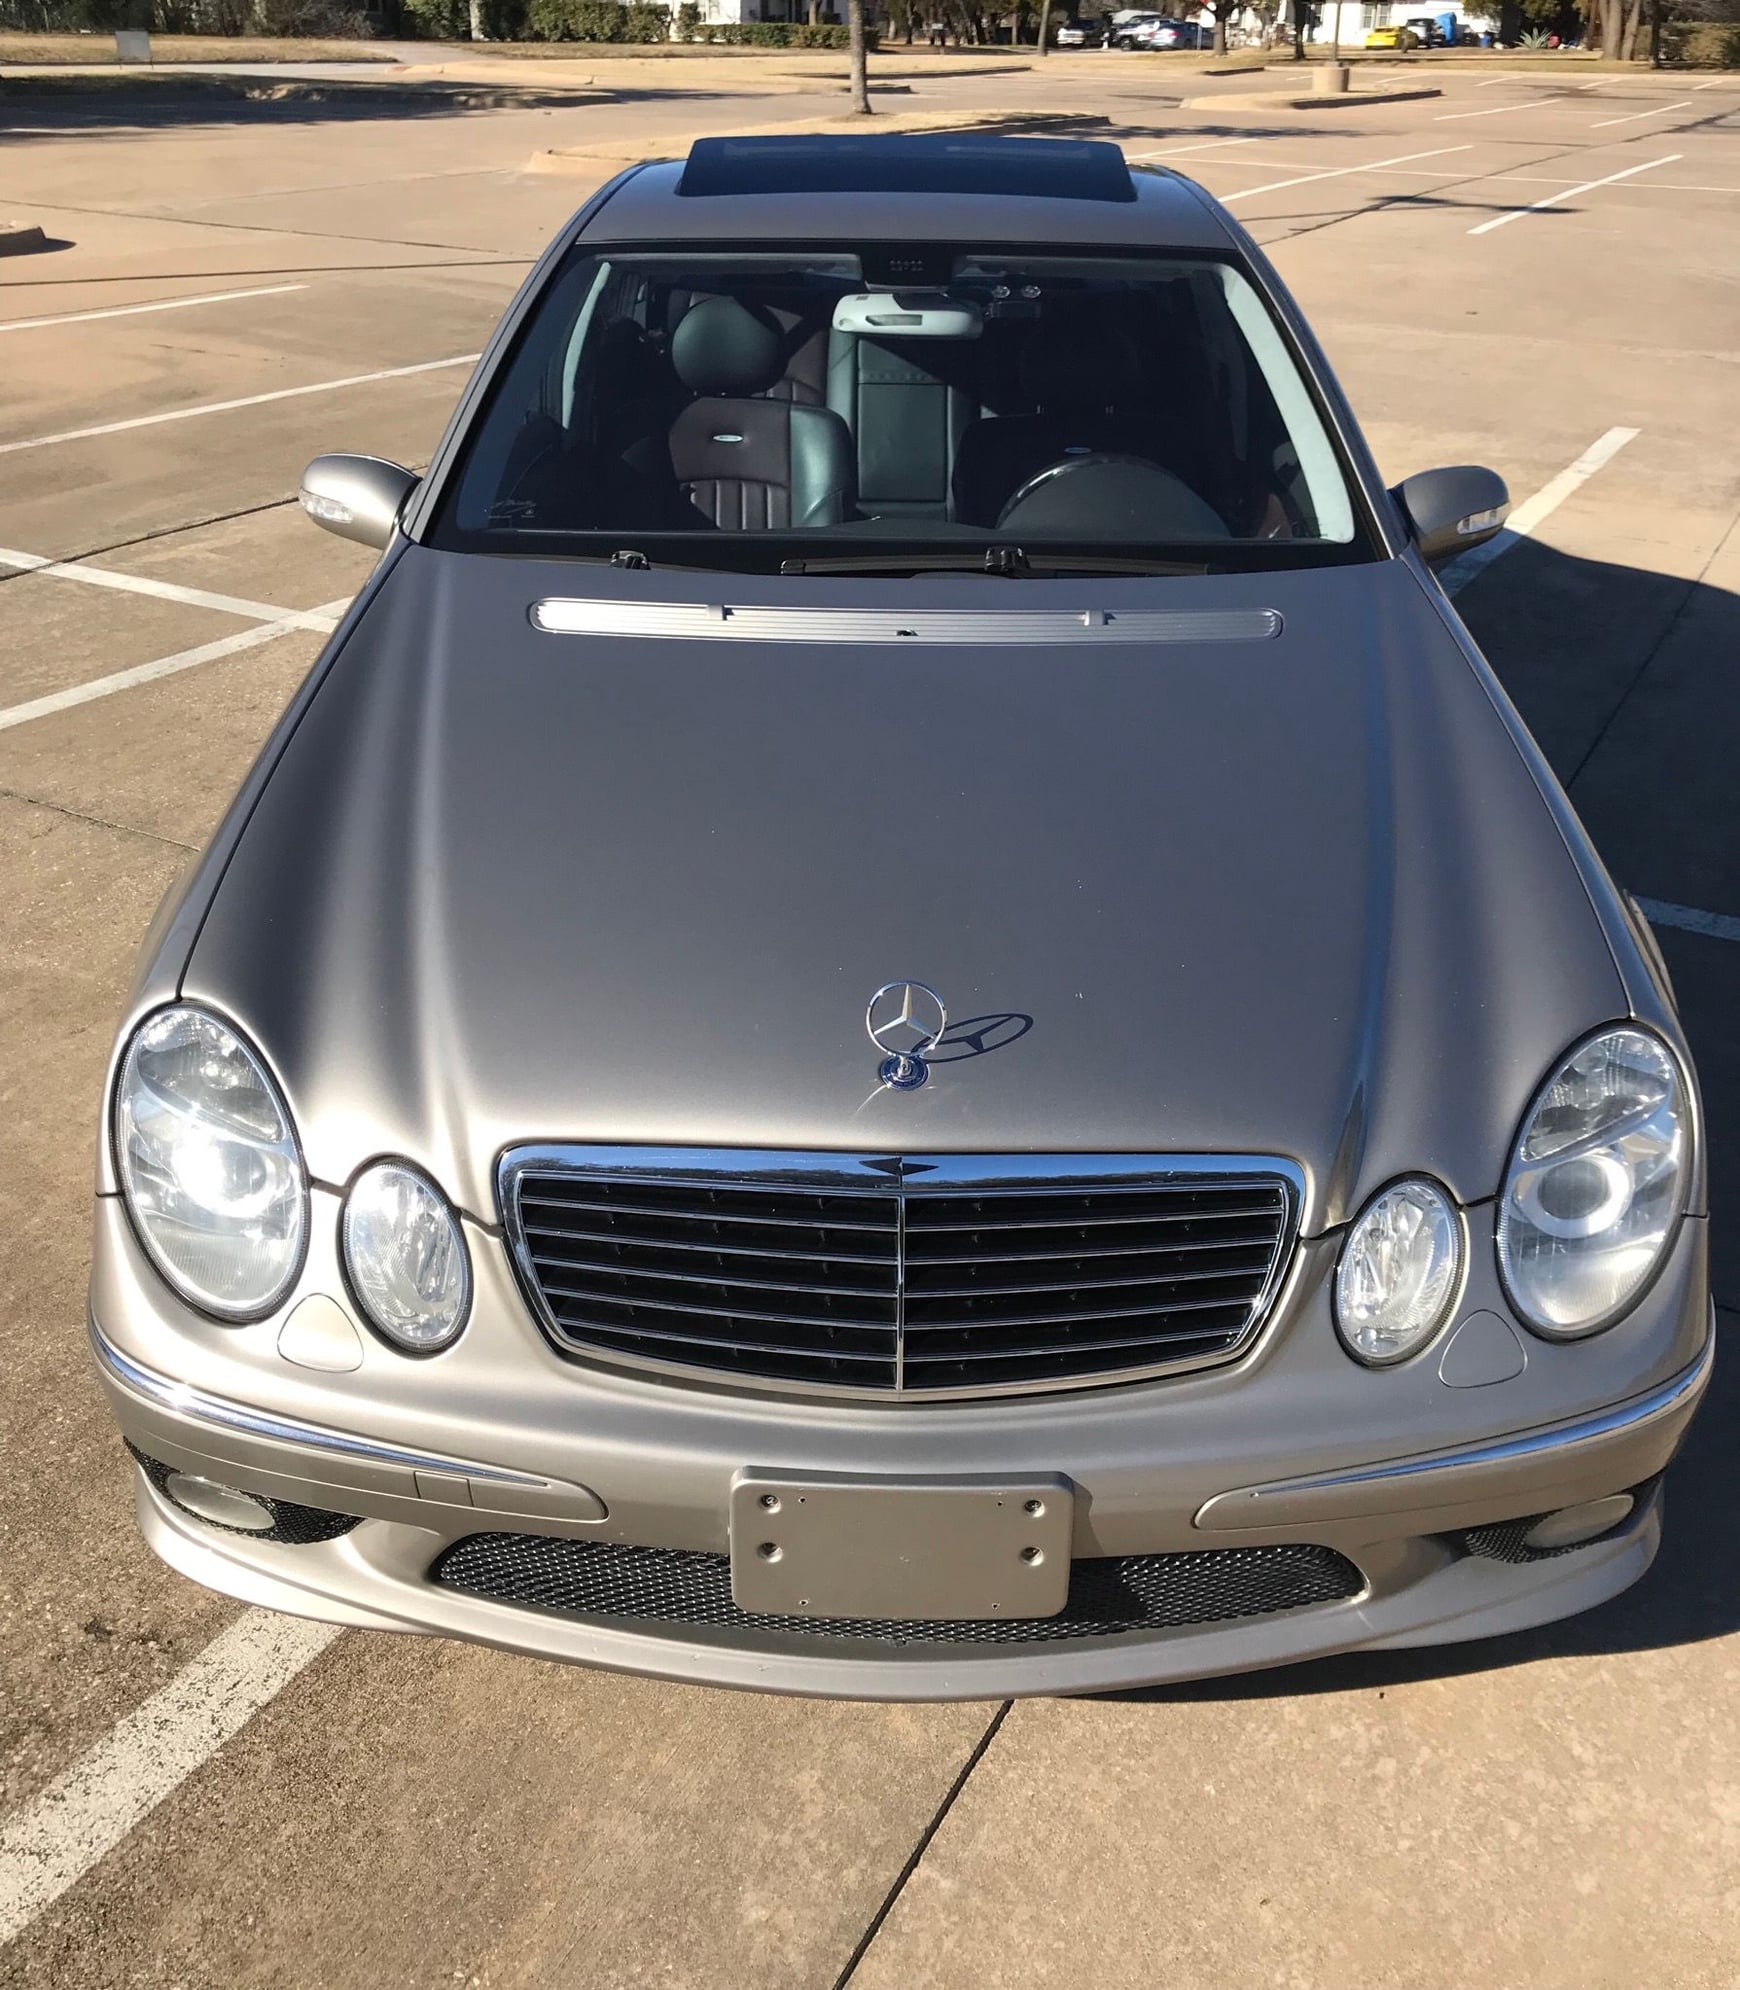 2003 Mercedes-Benz E55 AMG - 2003 E55 AMG *One of the cleanest on the market* - Used - VIN http://www.vinaud - 115,000 Miles - 8 cyl - Automatic - Sedan - Beige - Keller, TX 76248, United States